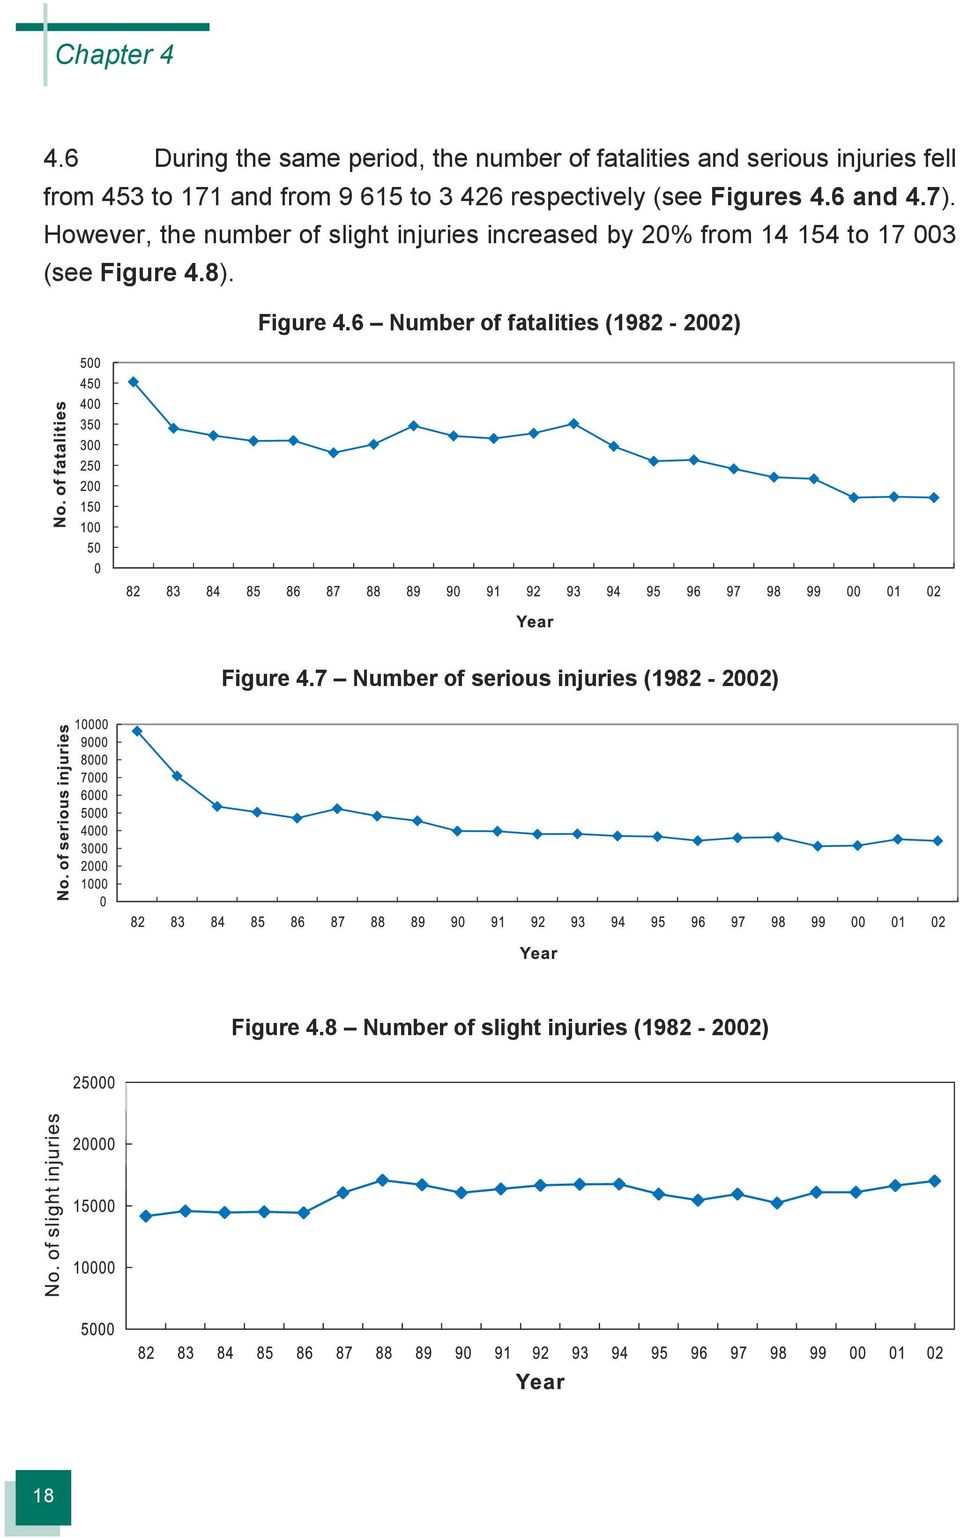 However, the number of slight injuries increased by 20% from 14 154 to 17 003 (see Figure 4.8).